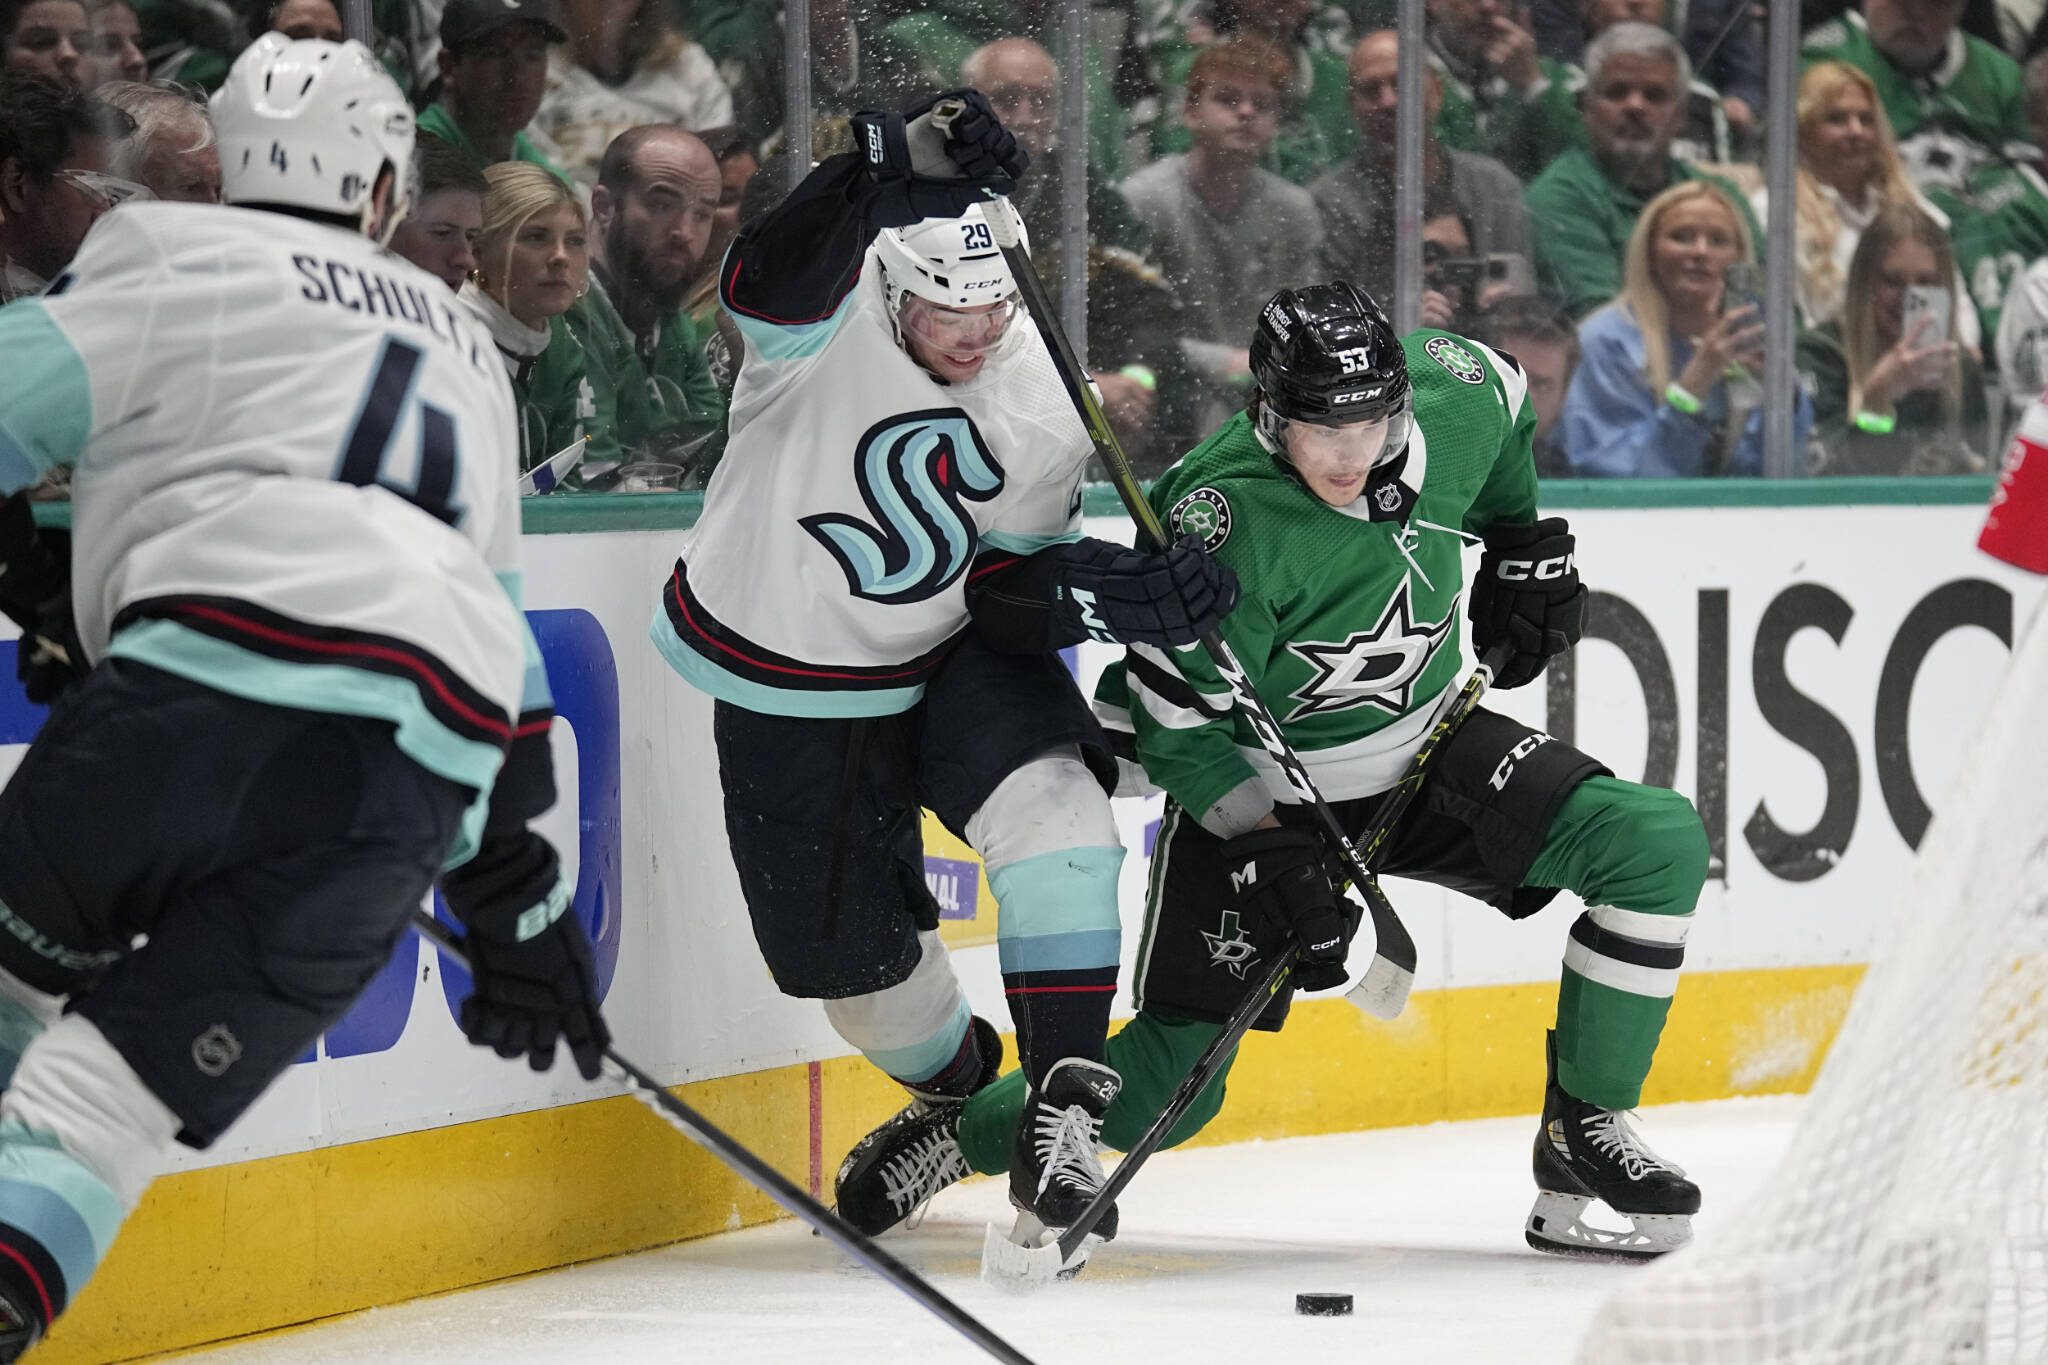 Kraken defenseman Vince Dunn (29) and the Stars’ Wyatt Johnston (53) compete for control of the puck during the first period of Game 2 of a second-round playoff series Thursday in Dallas. (AP Photo/Tony Gutierrez)